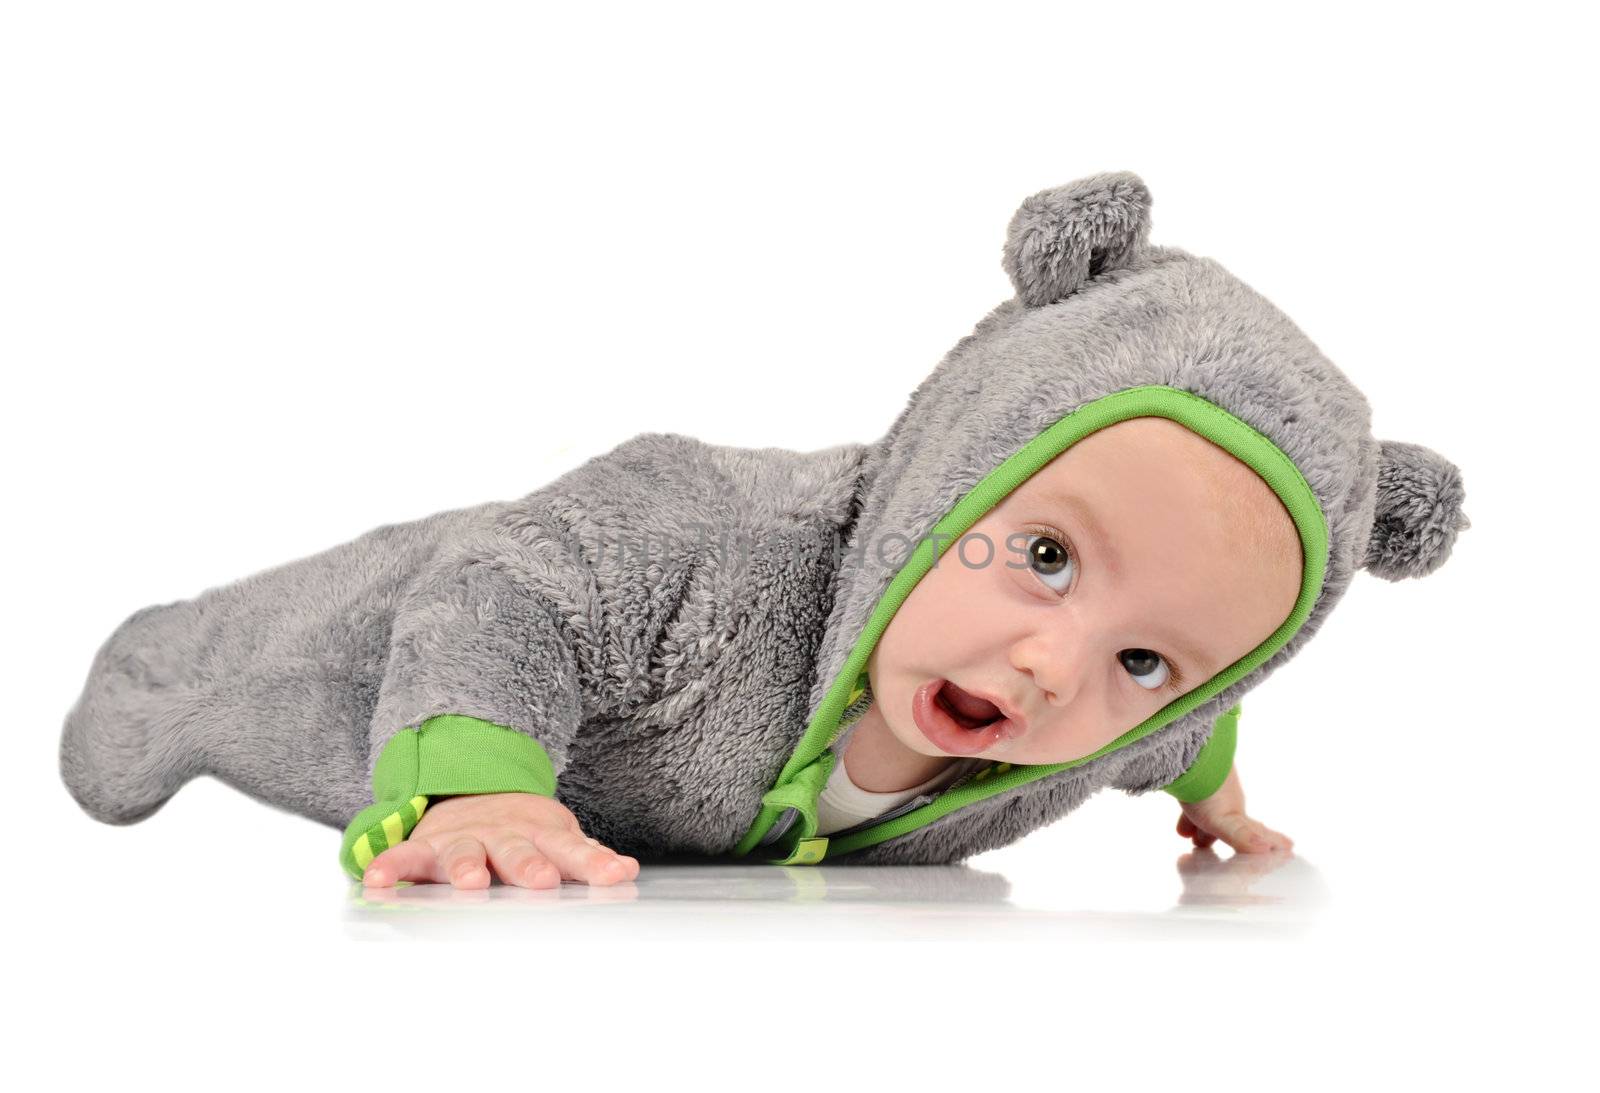 Cute little baby boy in fun clothes by tish1